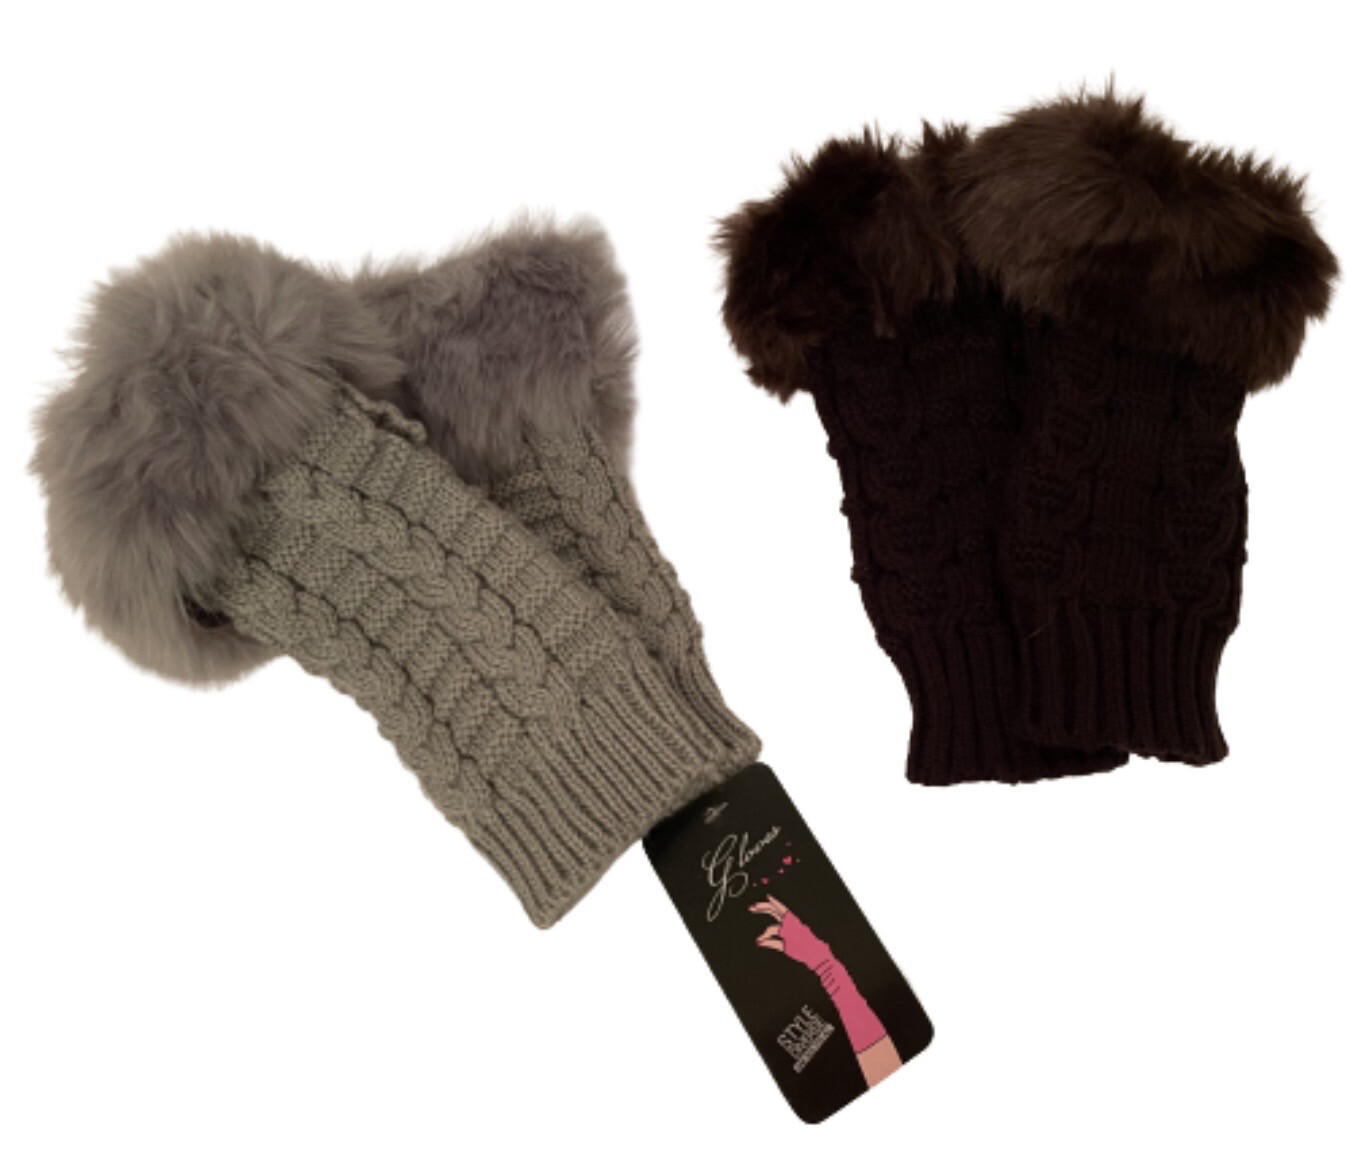 Fingerless Gloves With Fur Choose Brown Or Gray